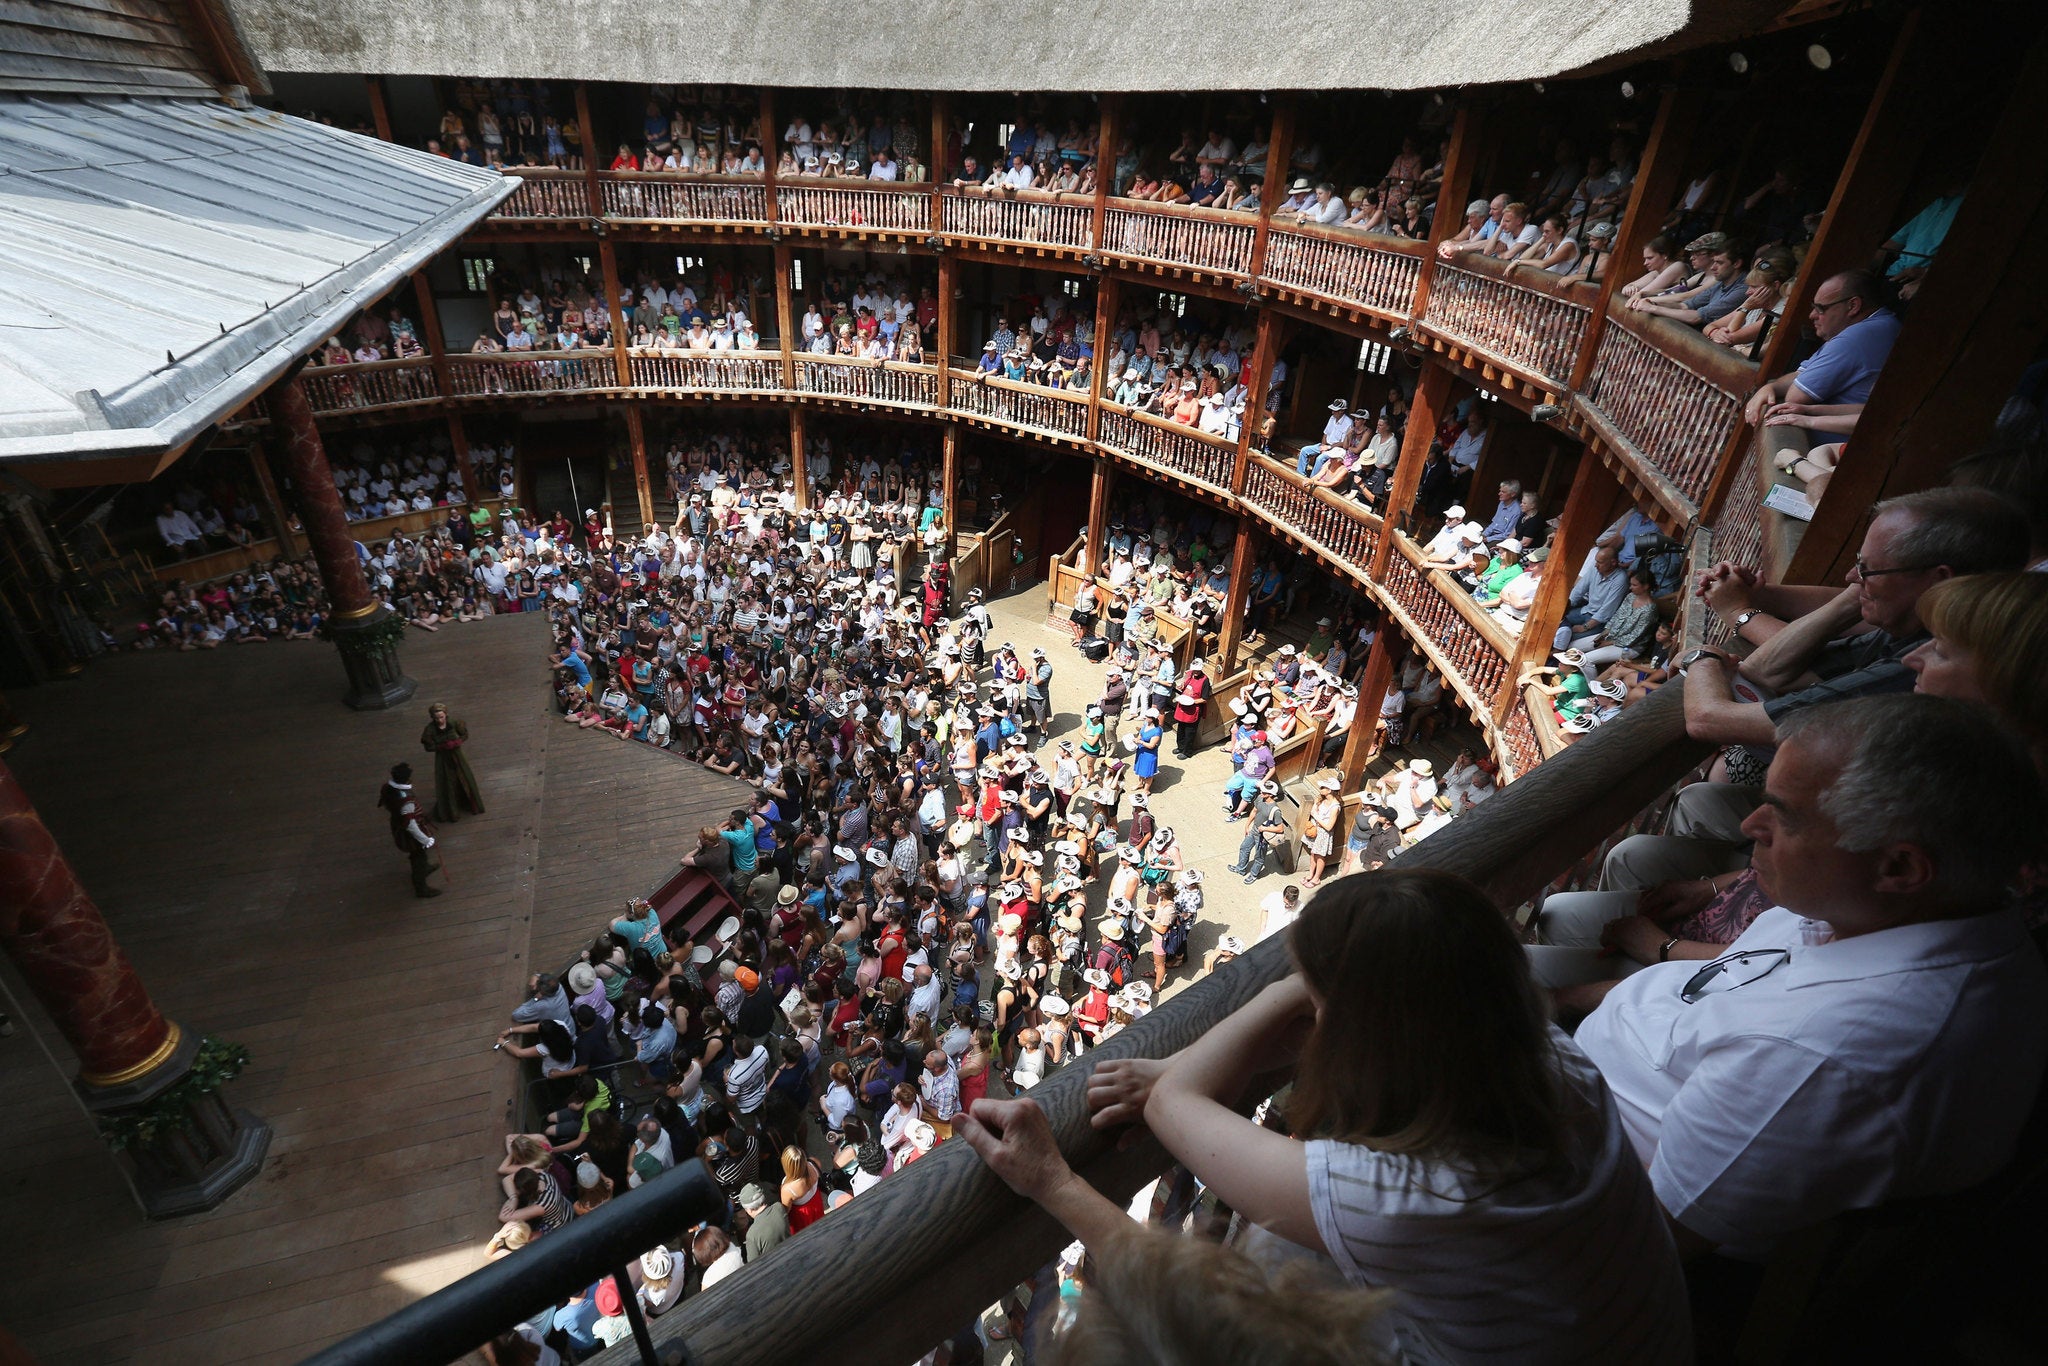 Crowds watch a performance at Shakespeare's Globe theatre